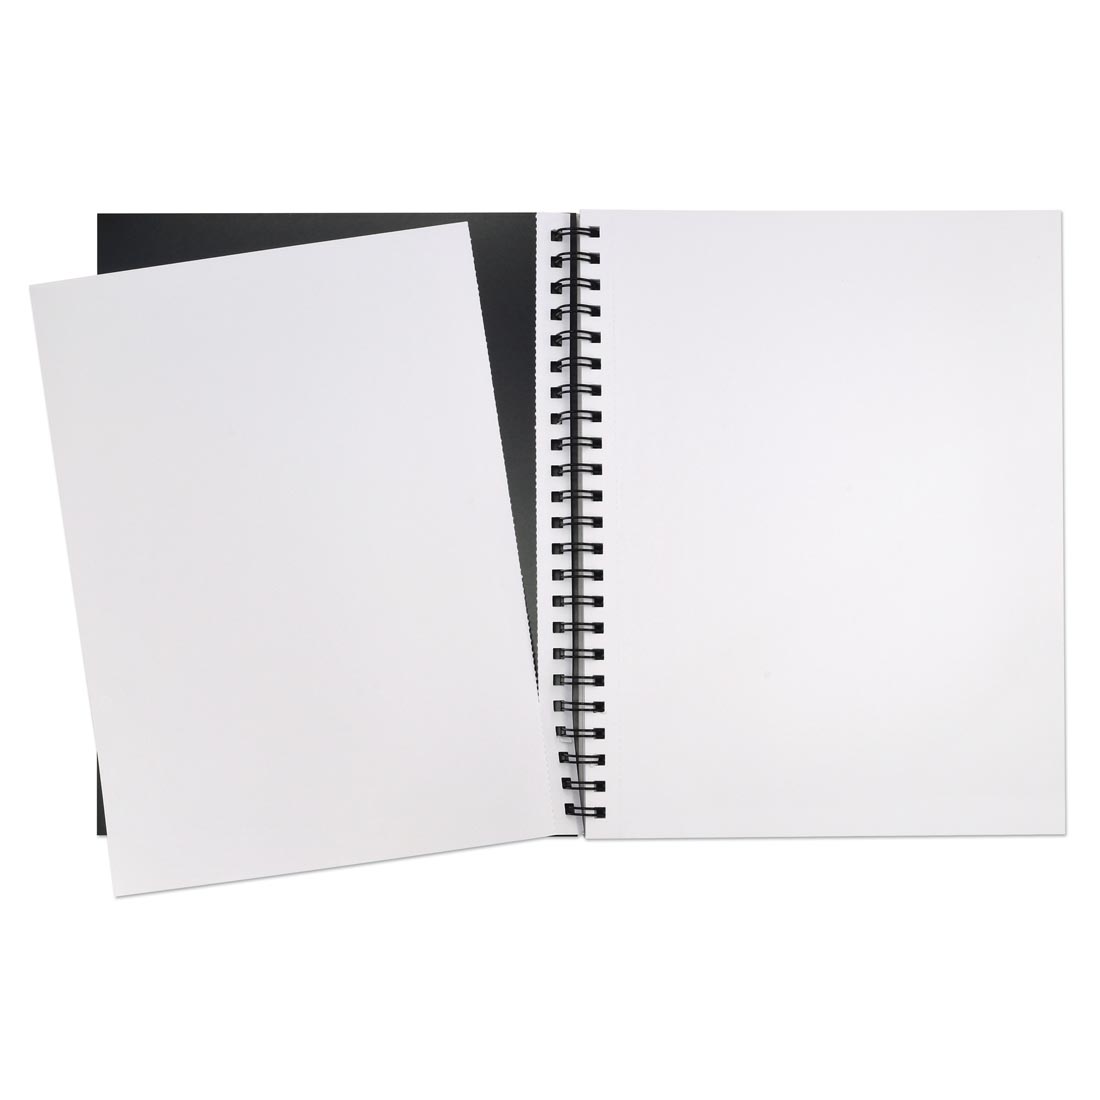 UCreate Poly Cover Sketch Book with perforated page being removed